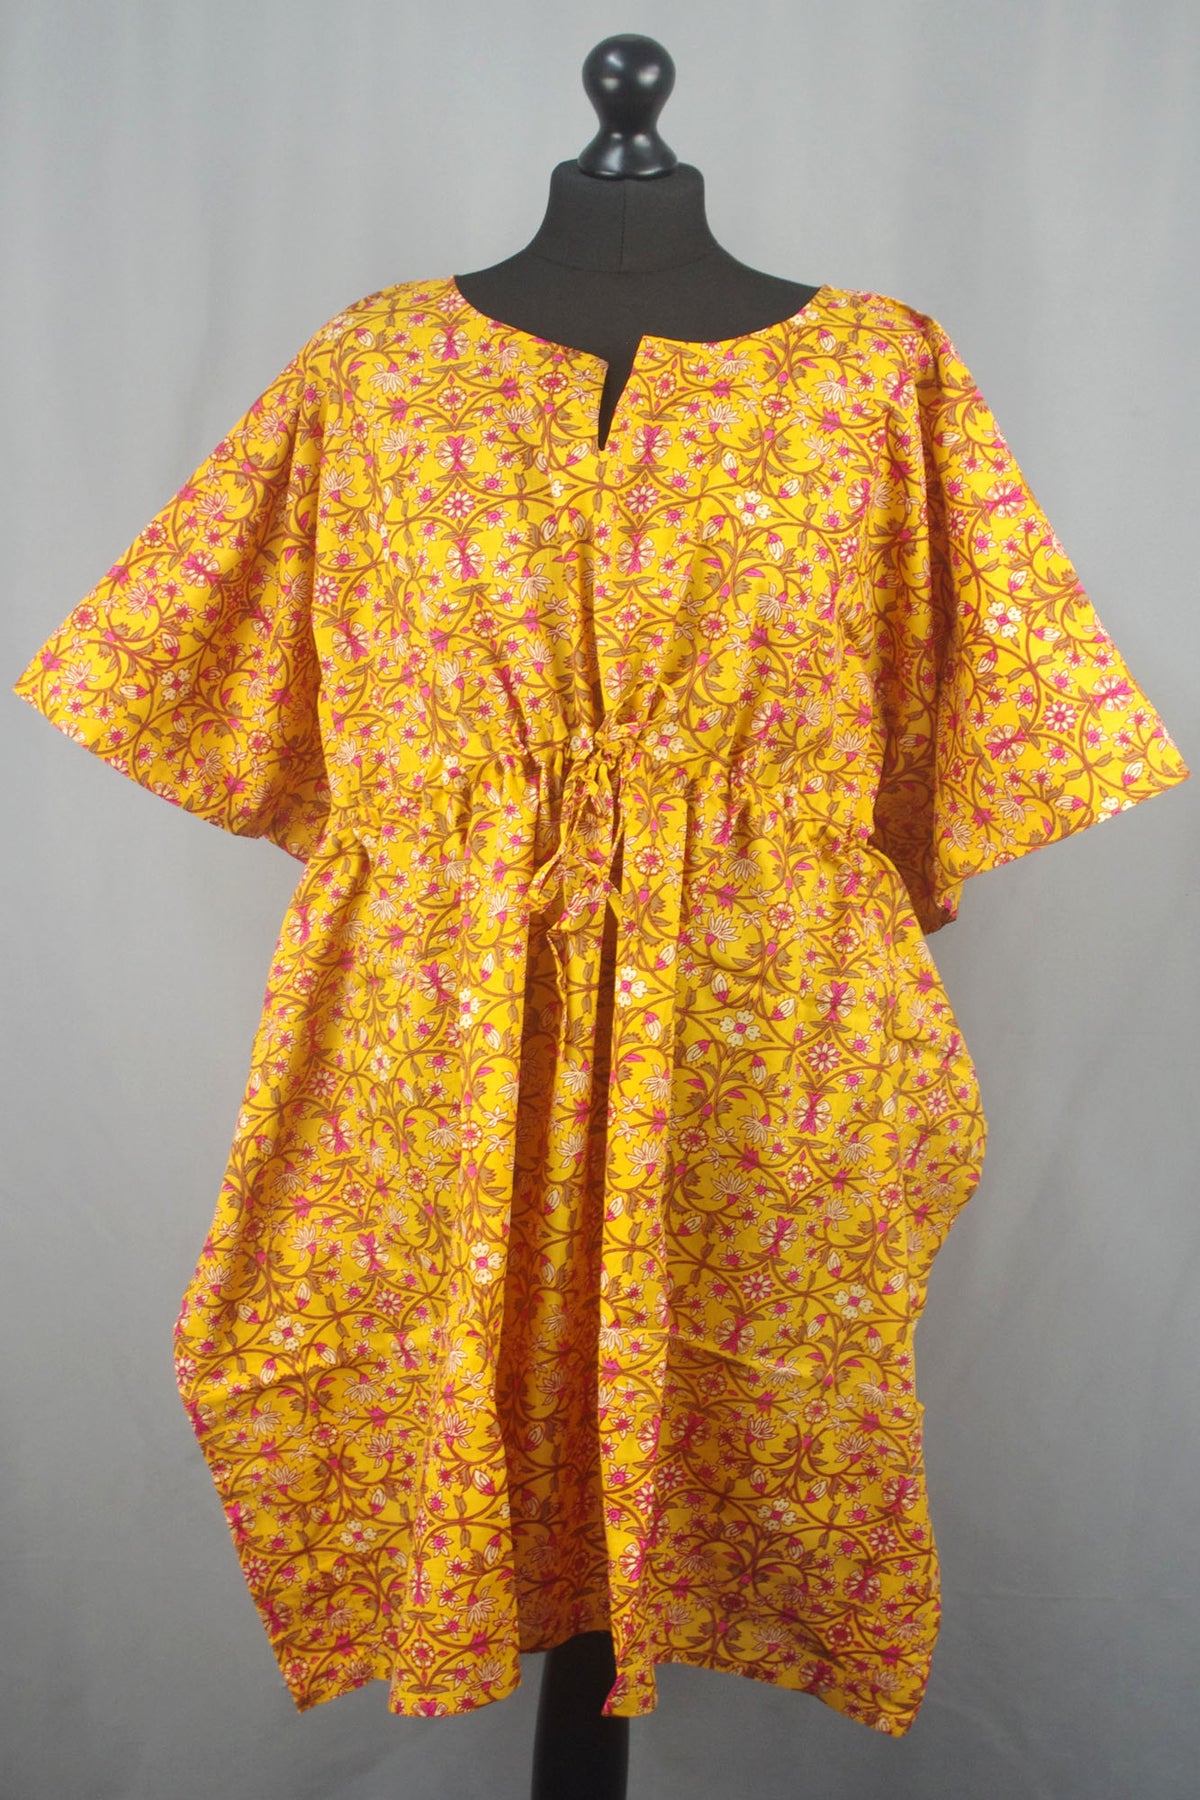 Block Printed Cotton Coverup / Kaftans - Yellow Floral